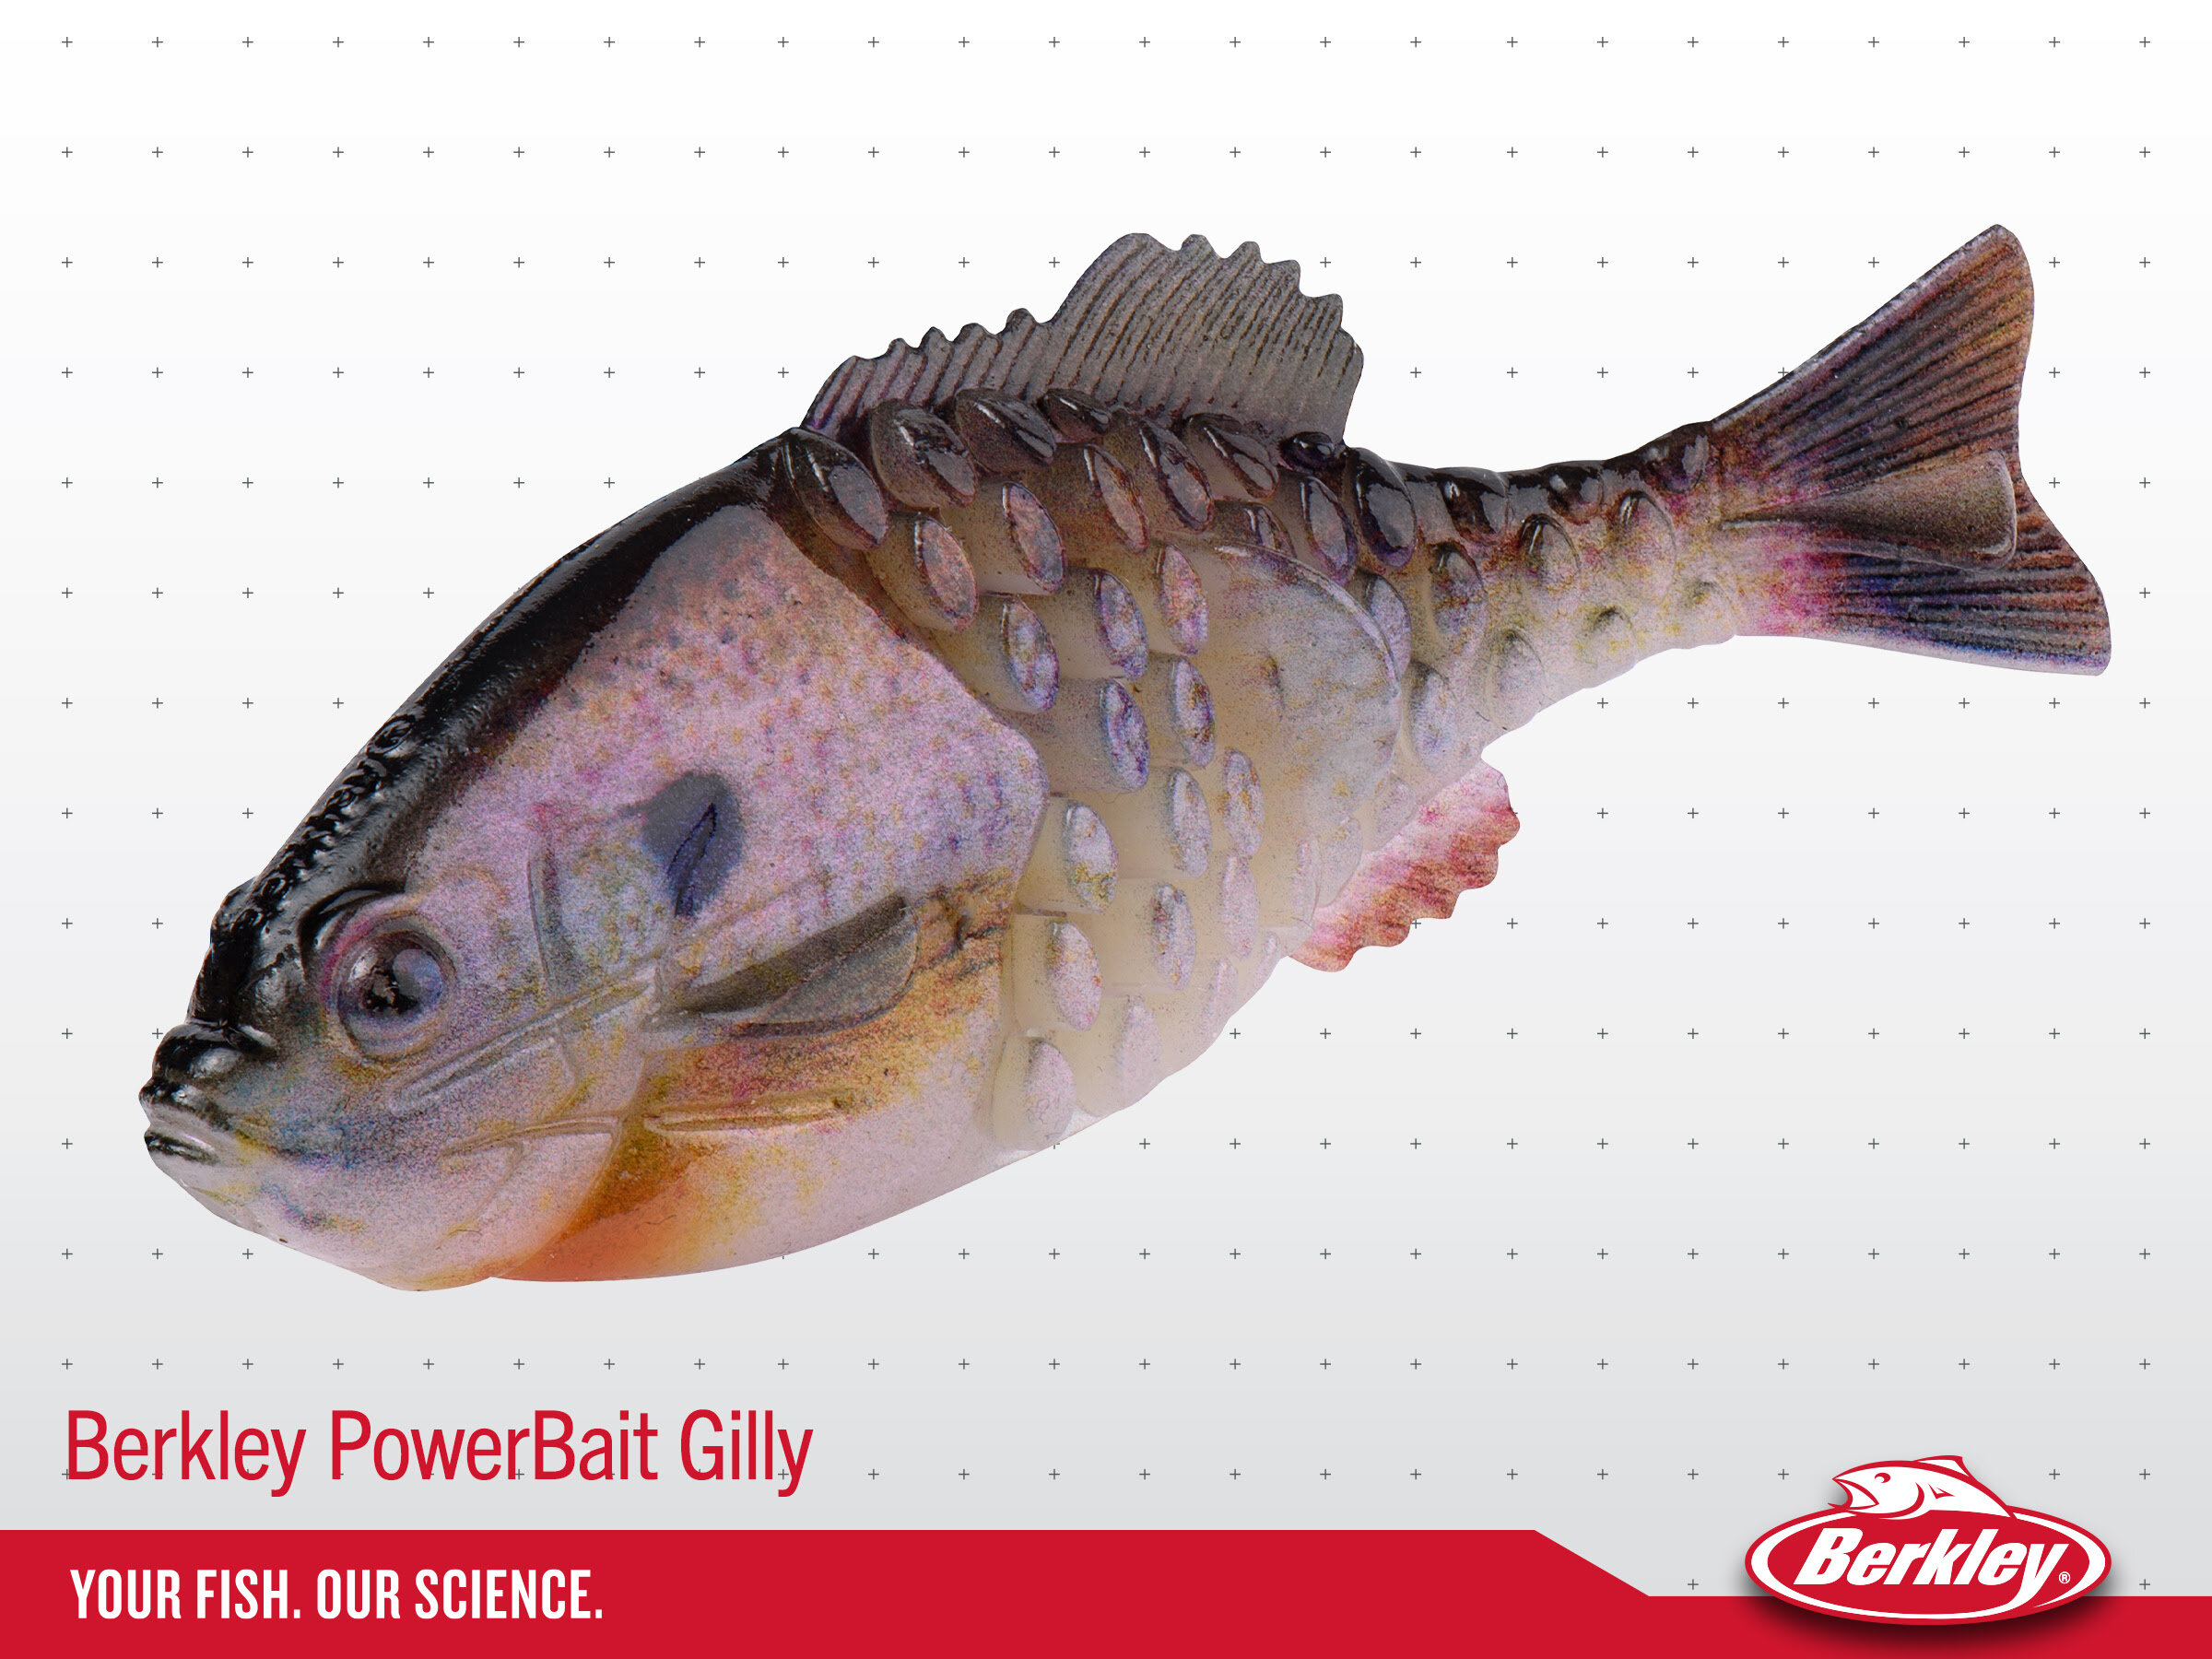 Berkley PowerBait Gilly Wins Best of Show at 2021 ICAST — Welcome